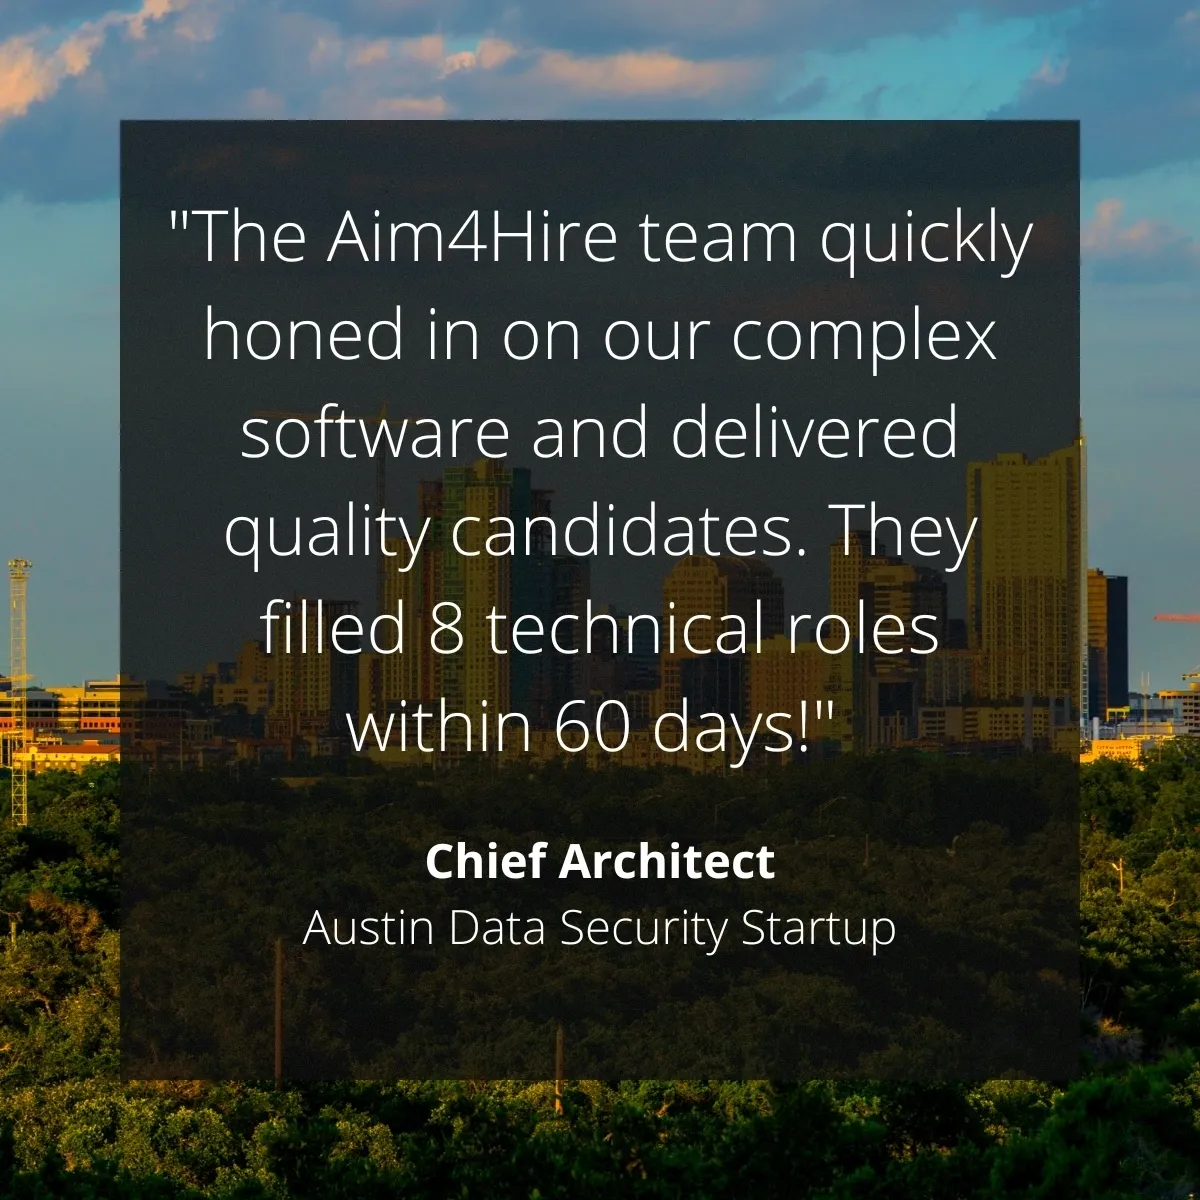 A quote about the aim 4 hire team